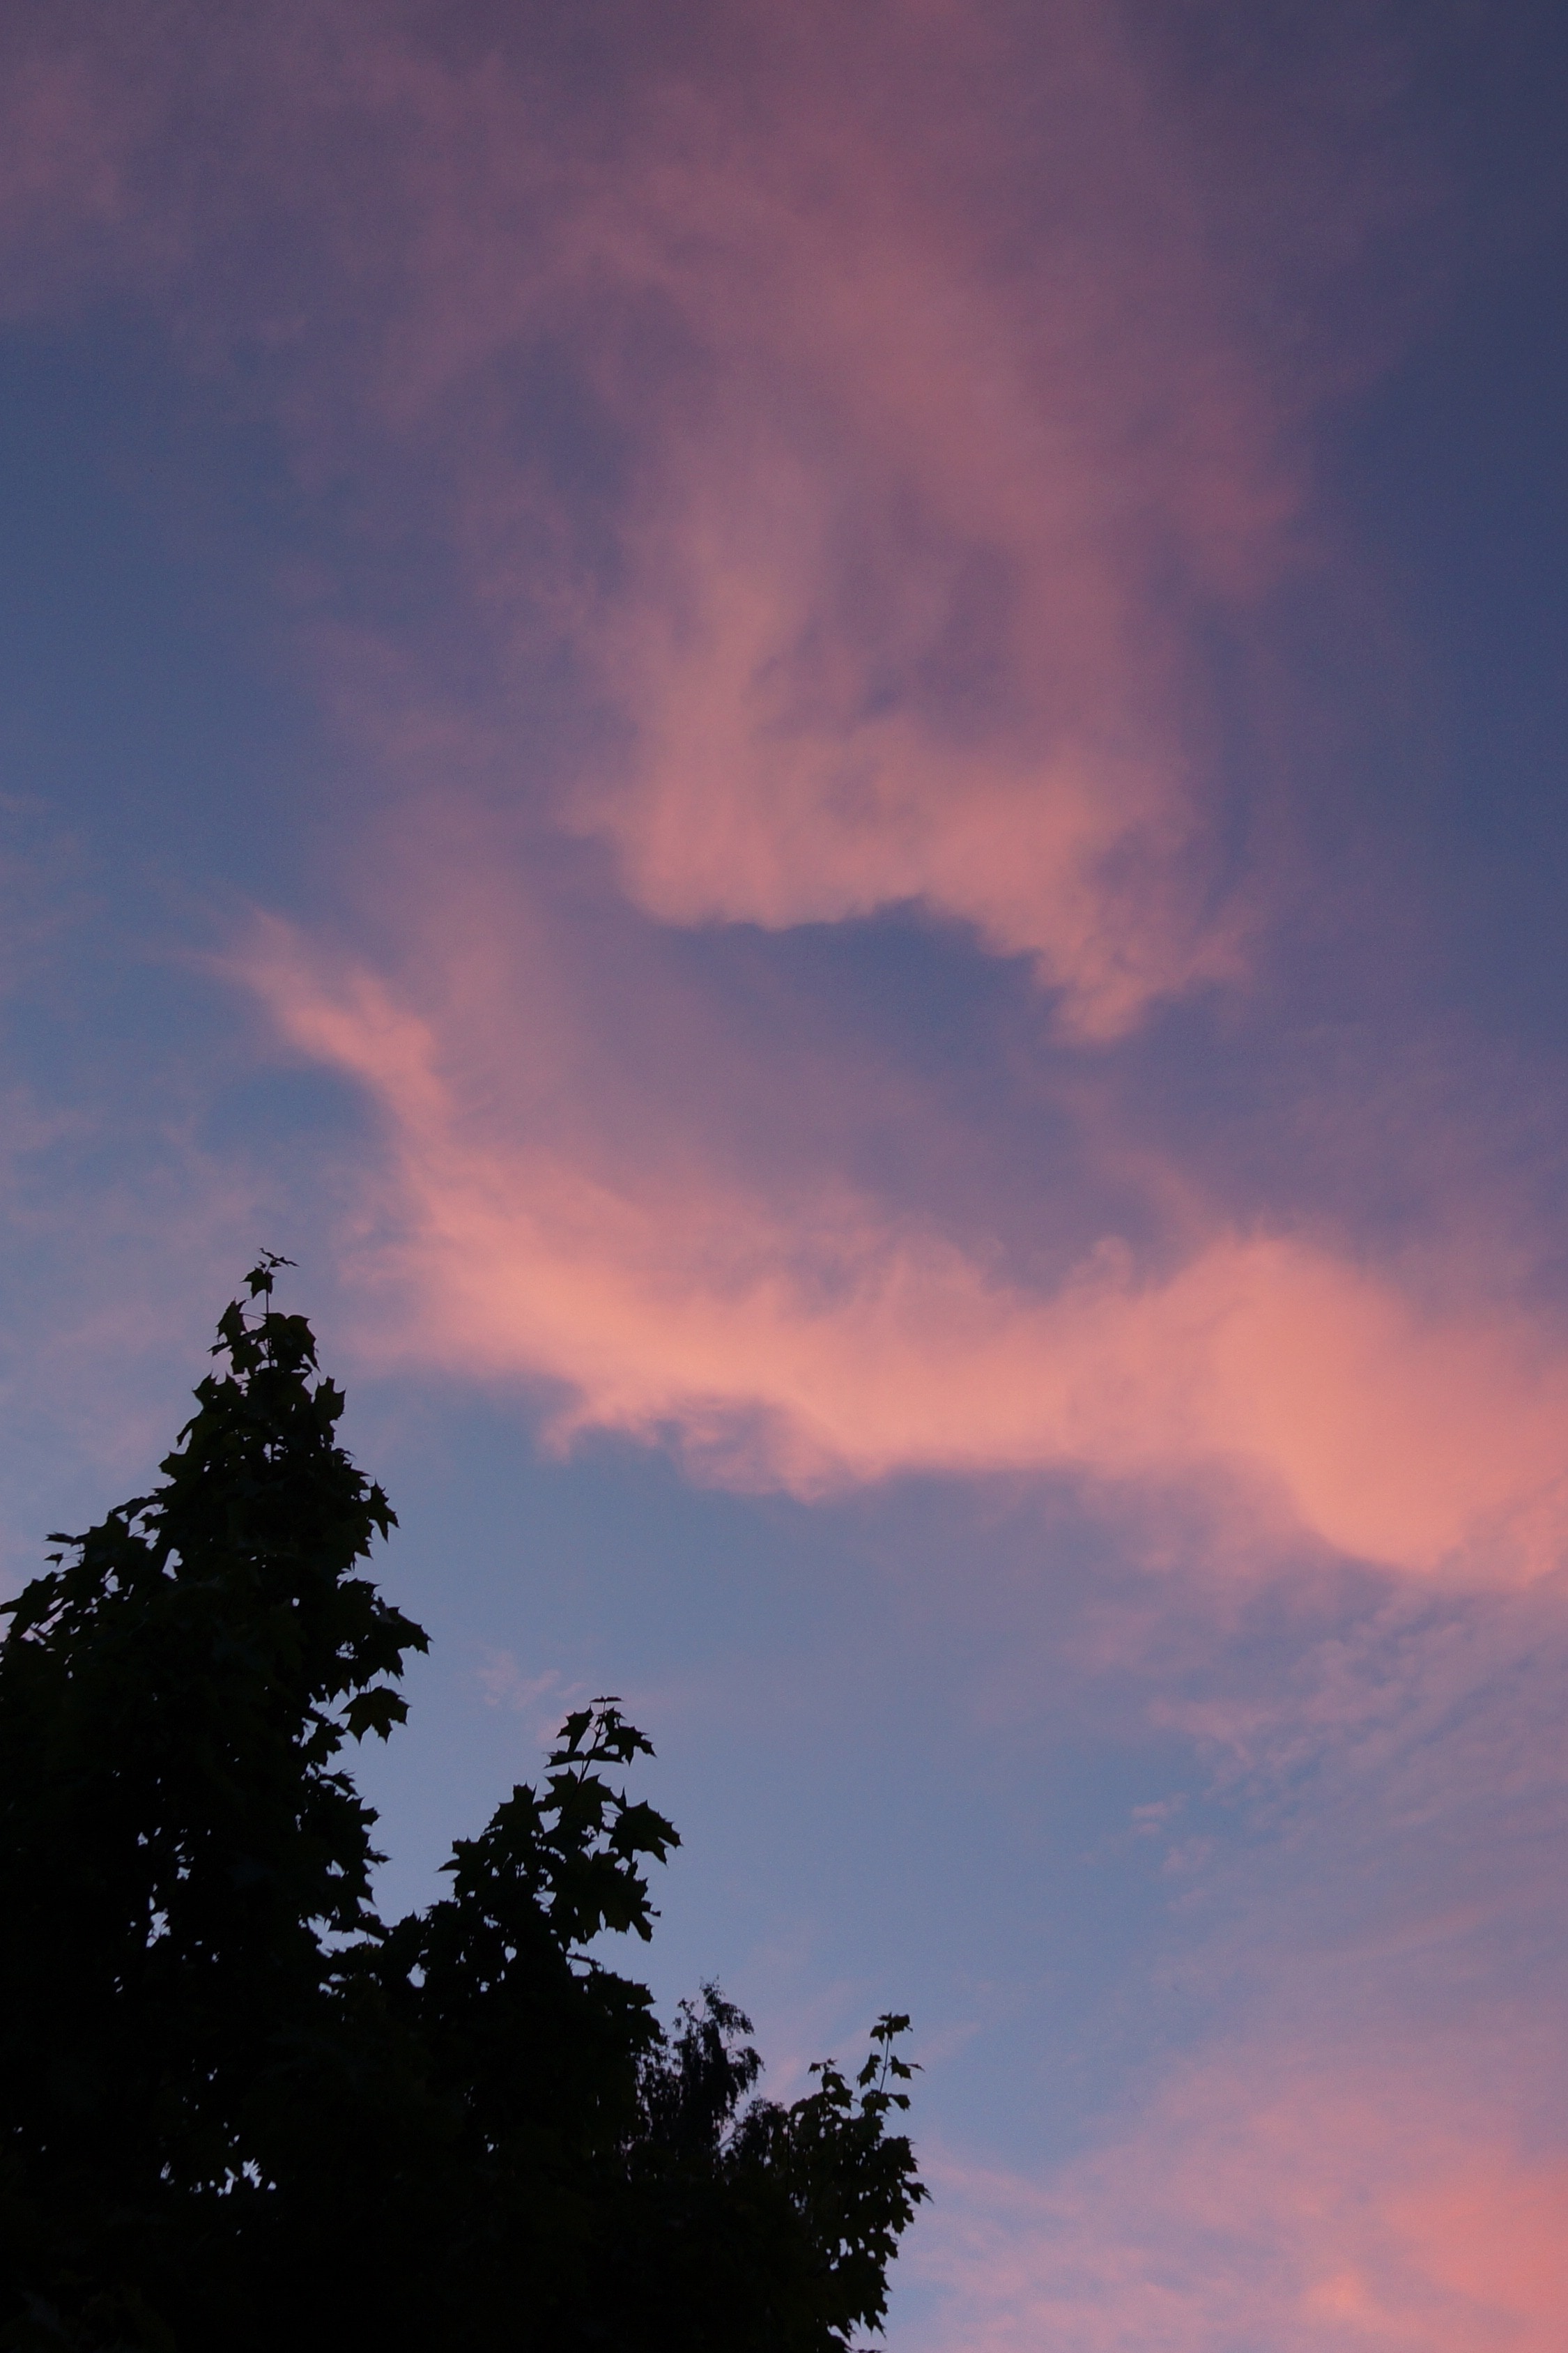 Clouds In The Evening, Afterglow, tree, cloud - sky